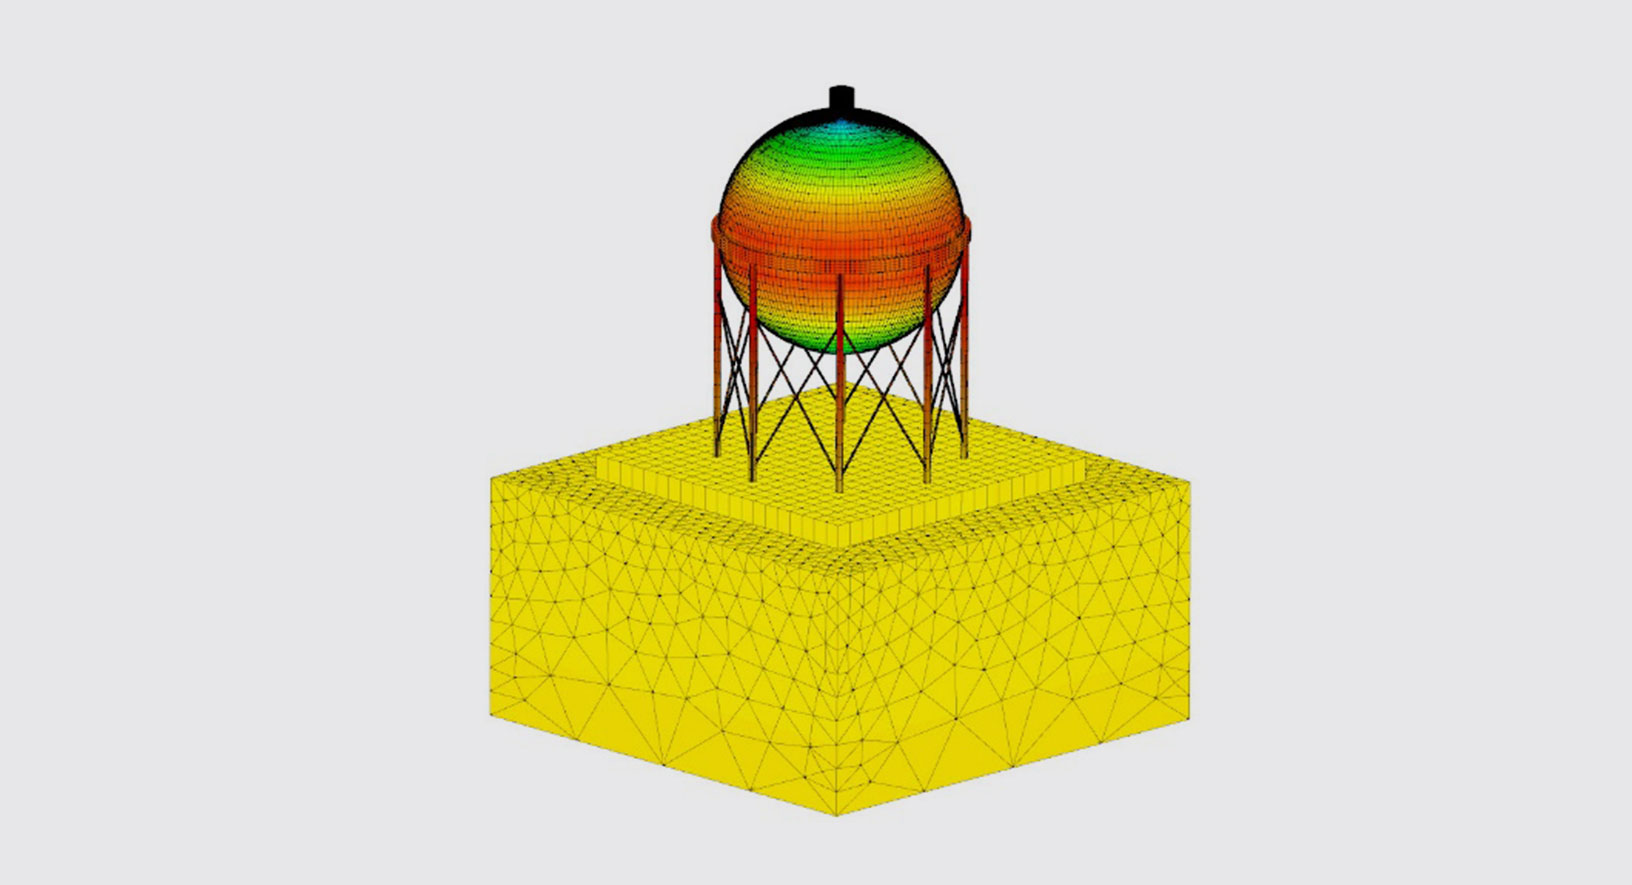 Multiphysics simulation for structural analysis of refinery using CivilFEM, powered by Marc